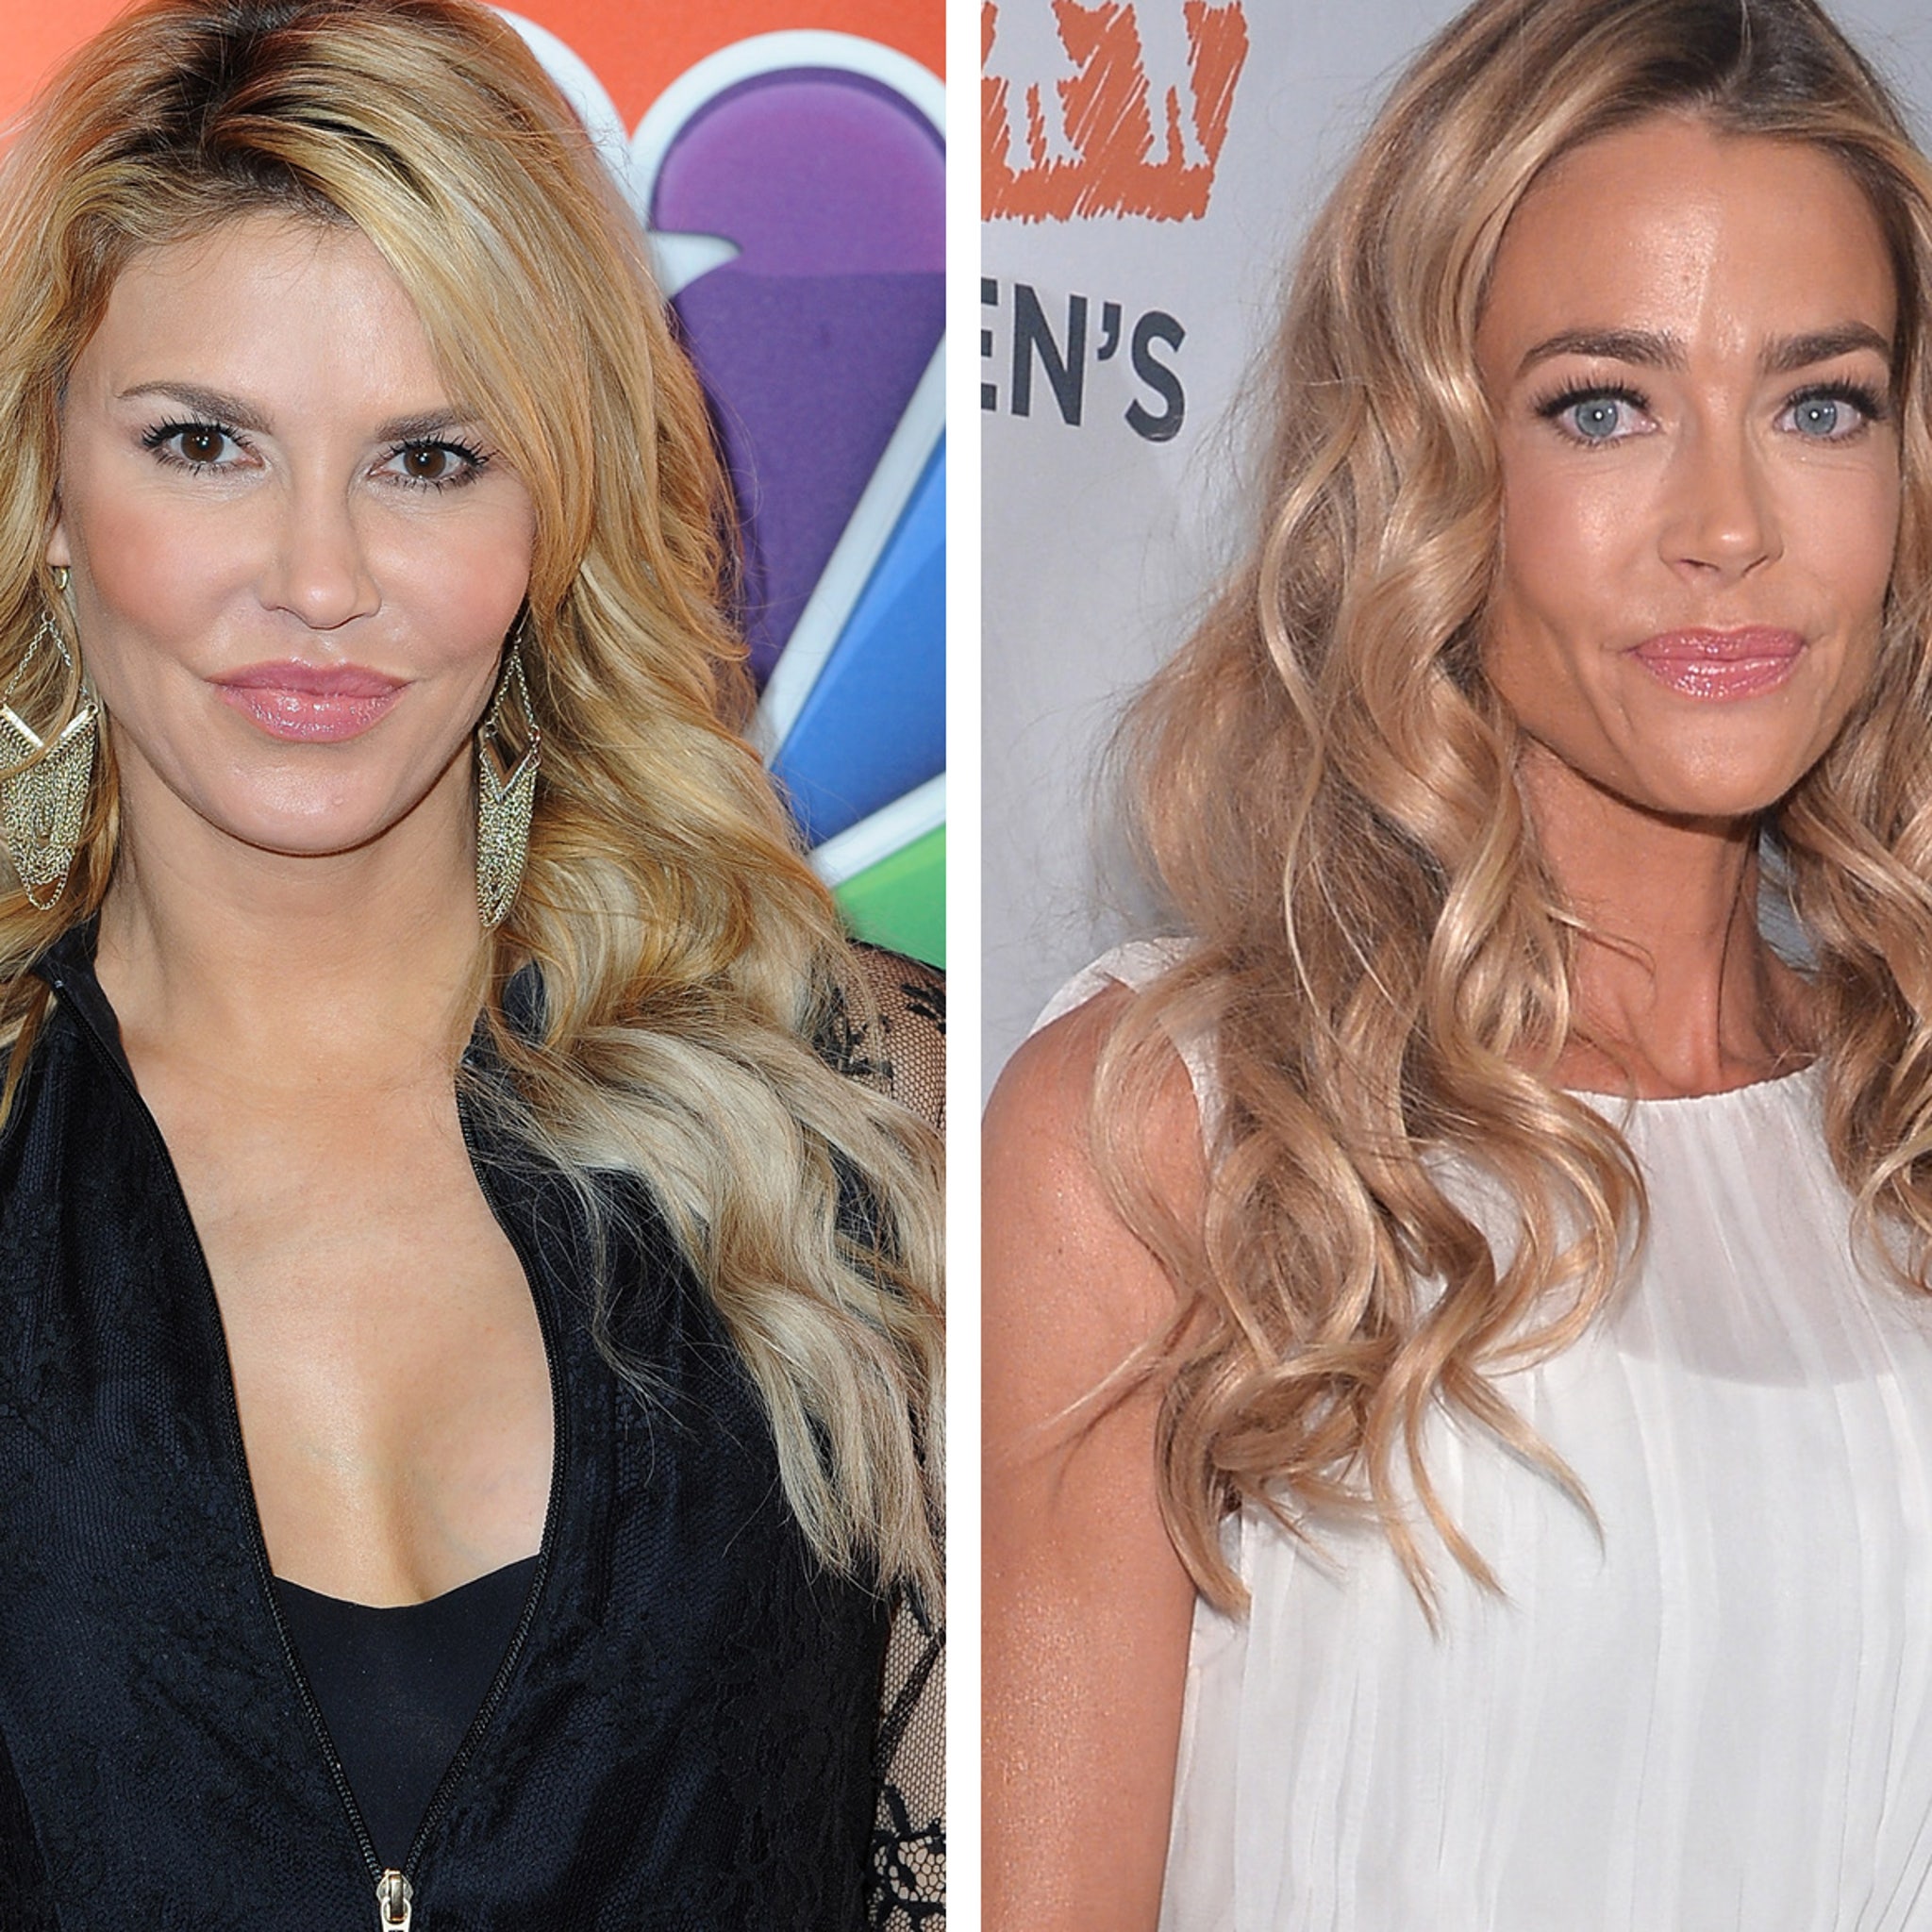 Brandi Glanville Posts Texts From Denise Richards In Attempt To Prove Hookup Claims photo